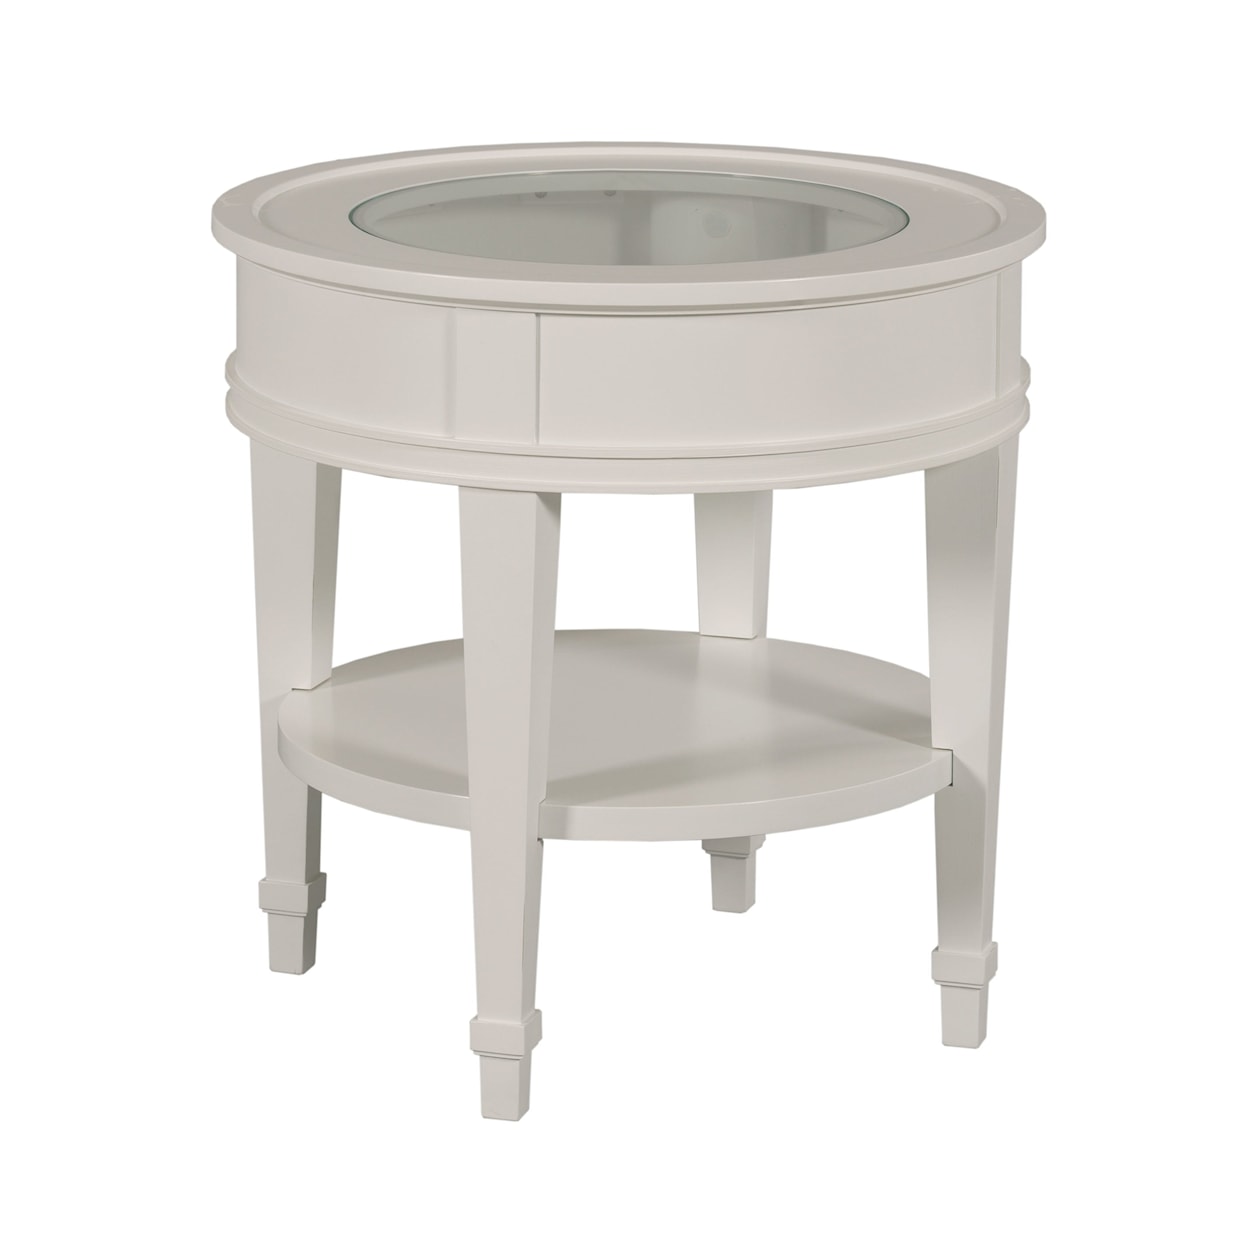 Hammary Structures Round End Table